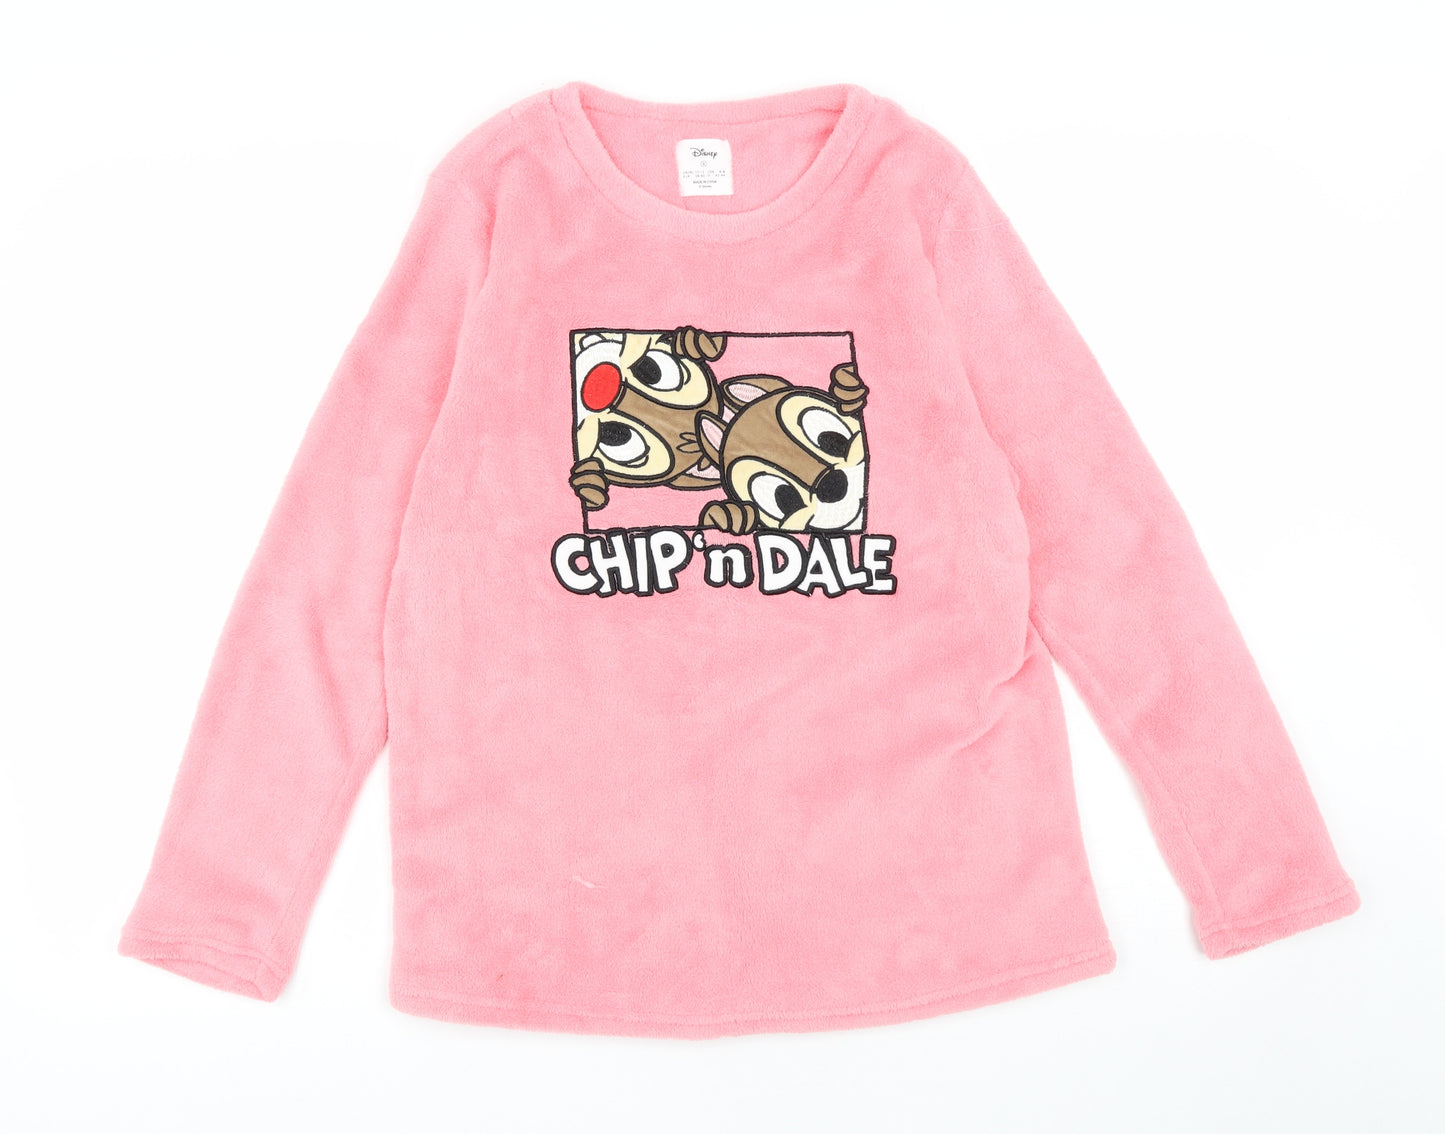 Primark Girls Pink Solid Polyester Top Pyjama Top Size S - Chip & Dale